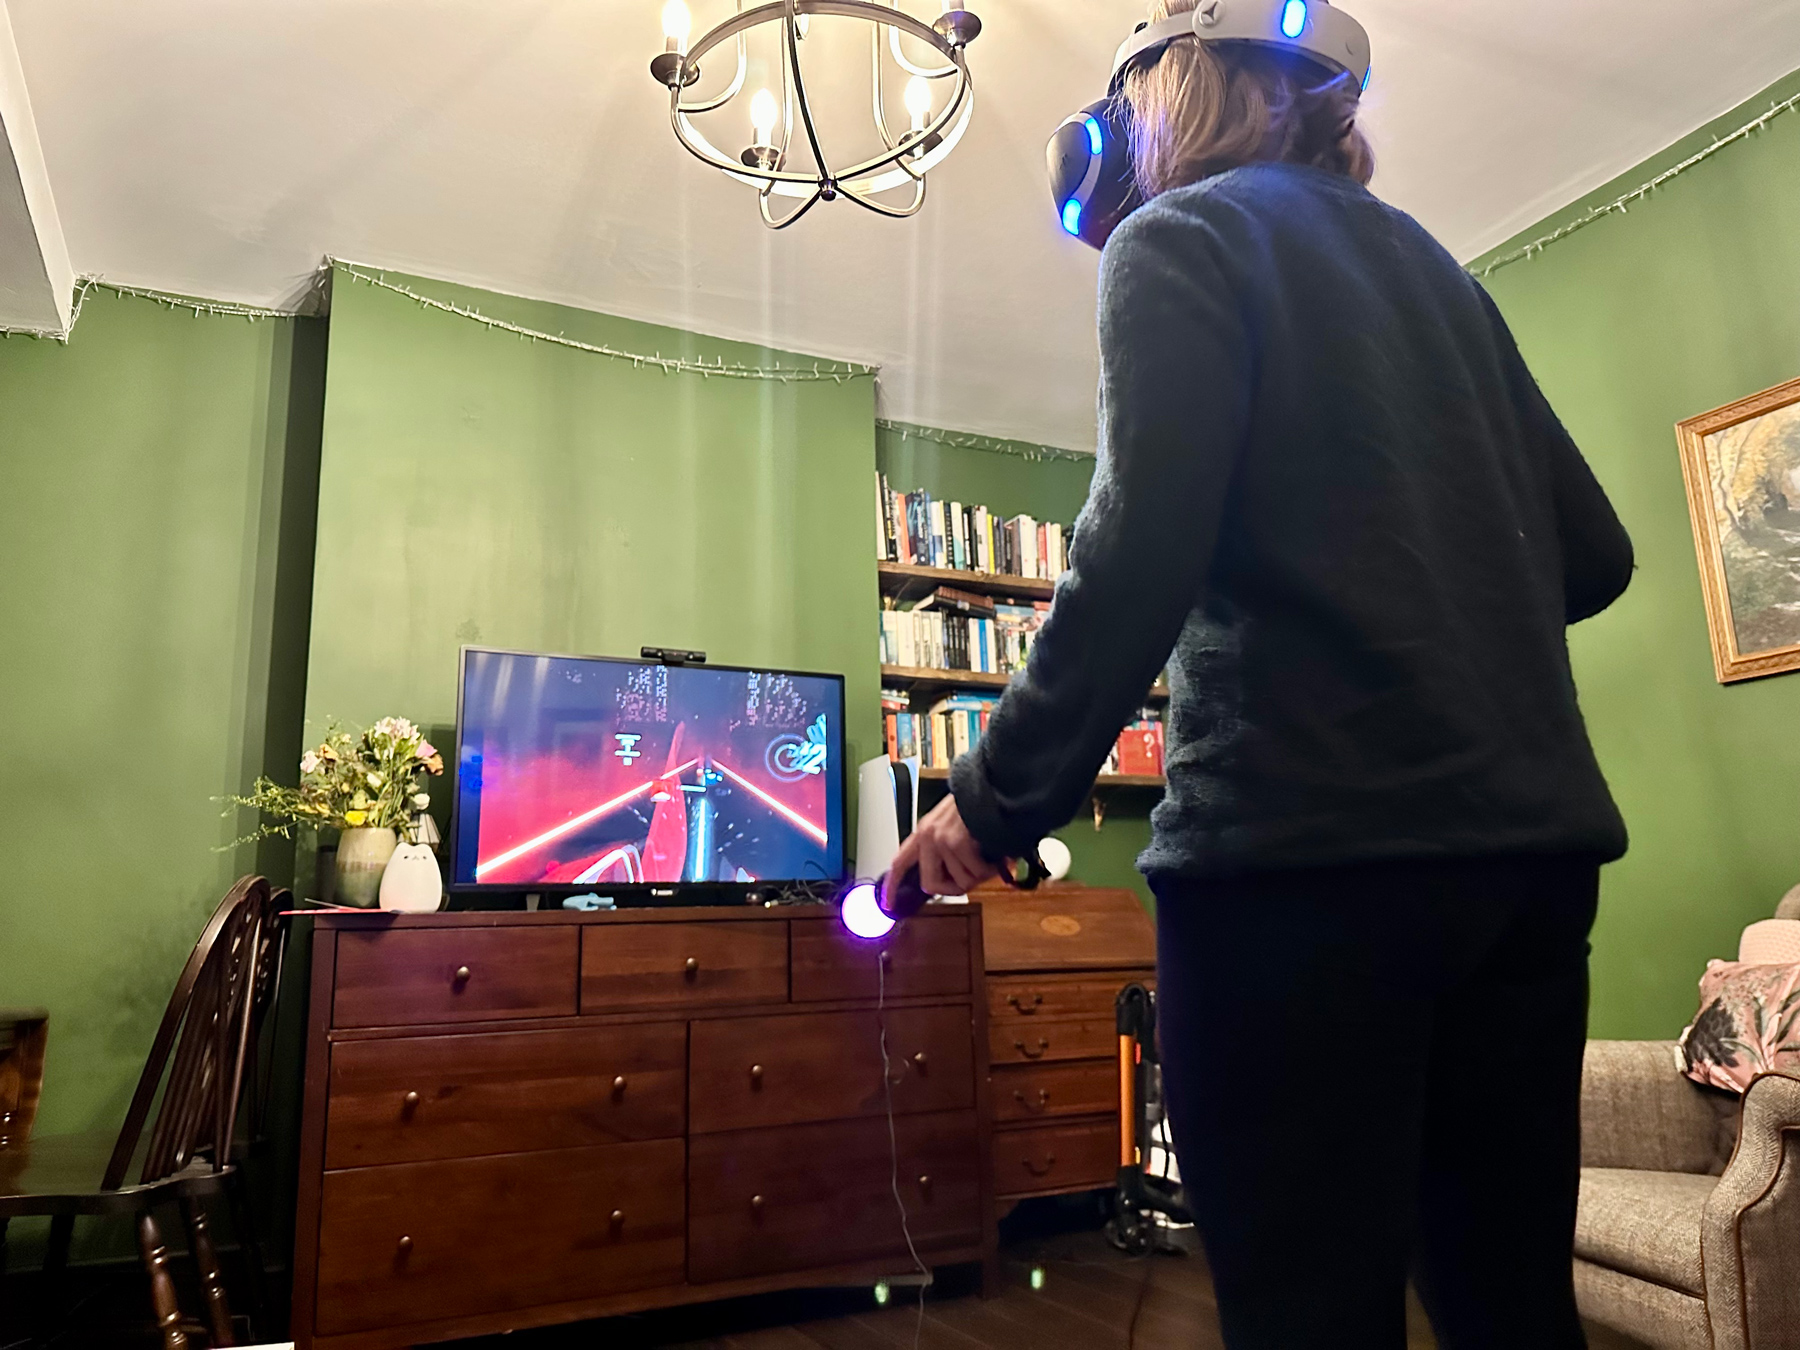 Charlotte stood in our living room playing Beat Saber